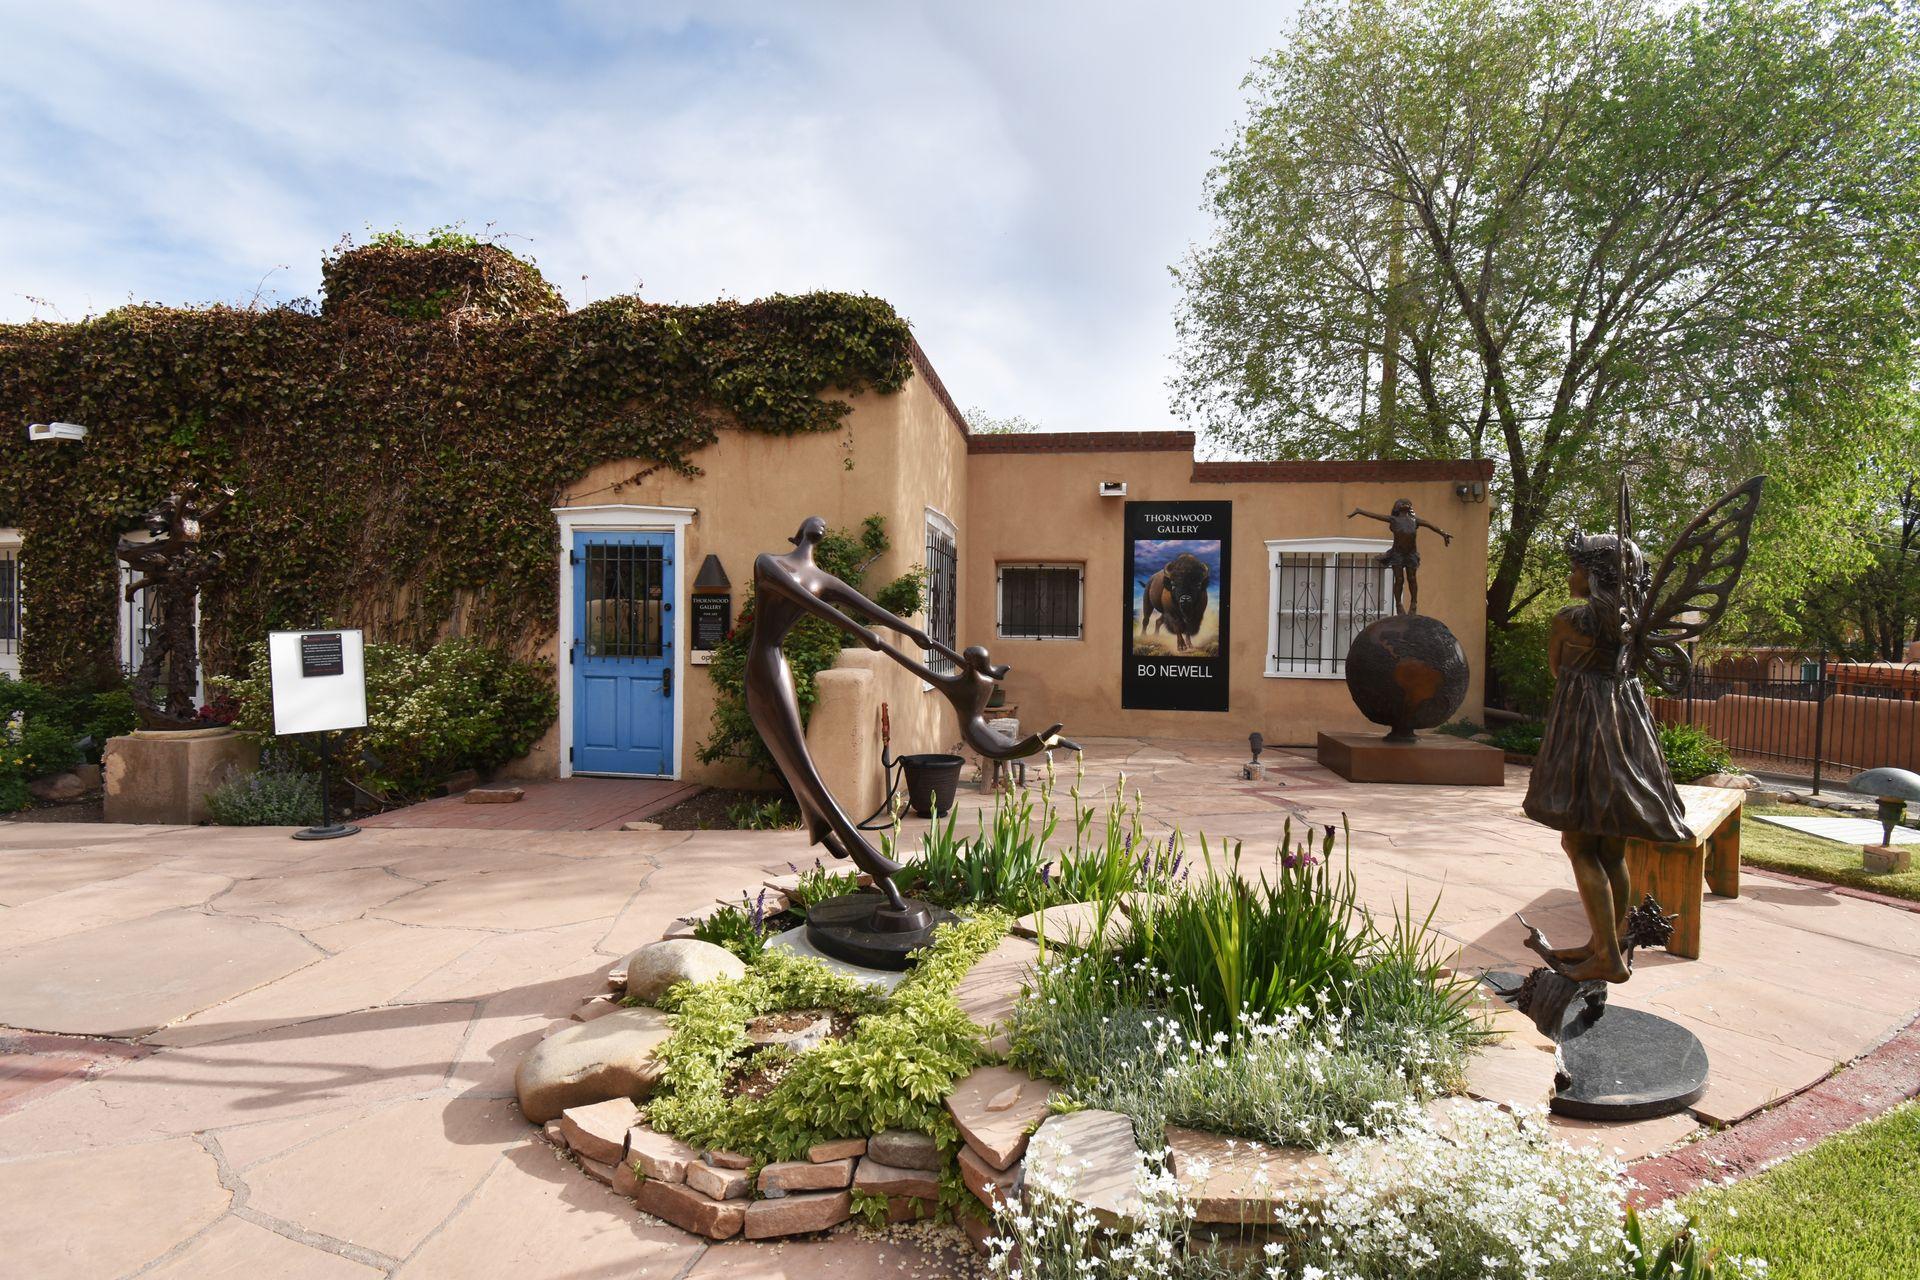 An art gallery on Canyon Road with several outdoor sculptures. The building is covered in vines and there is some beautiful greenery among the outdoor statues.